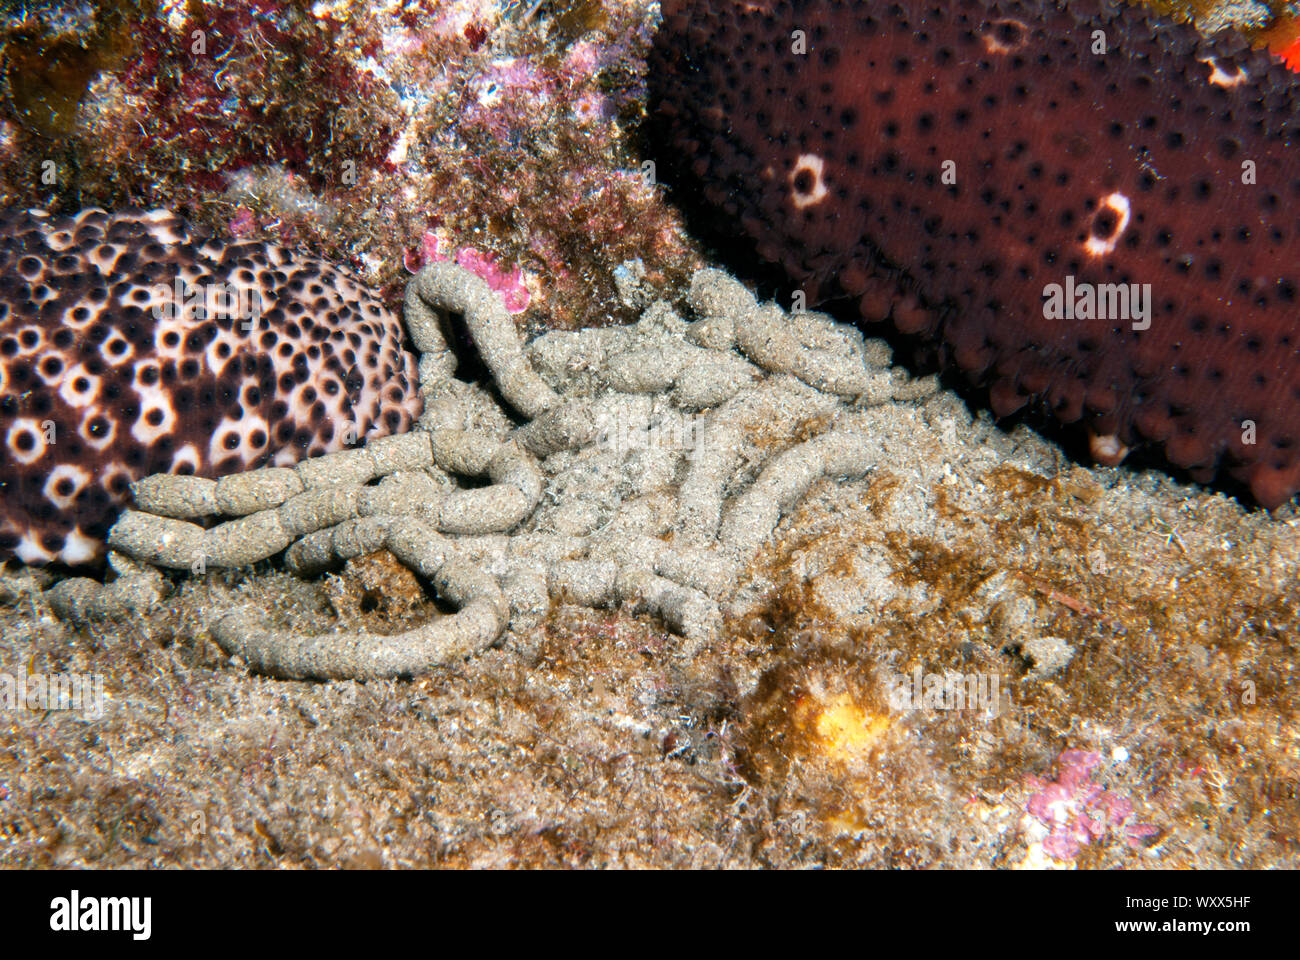 Calcium carbonate and ammonia present in the detritus of sea cucumbers help to form the skeletons of coral organisms and fertilize the seabed. Coton s Stock Photo